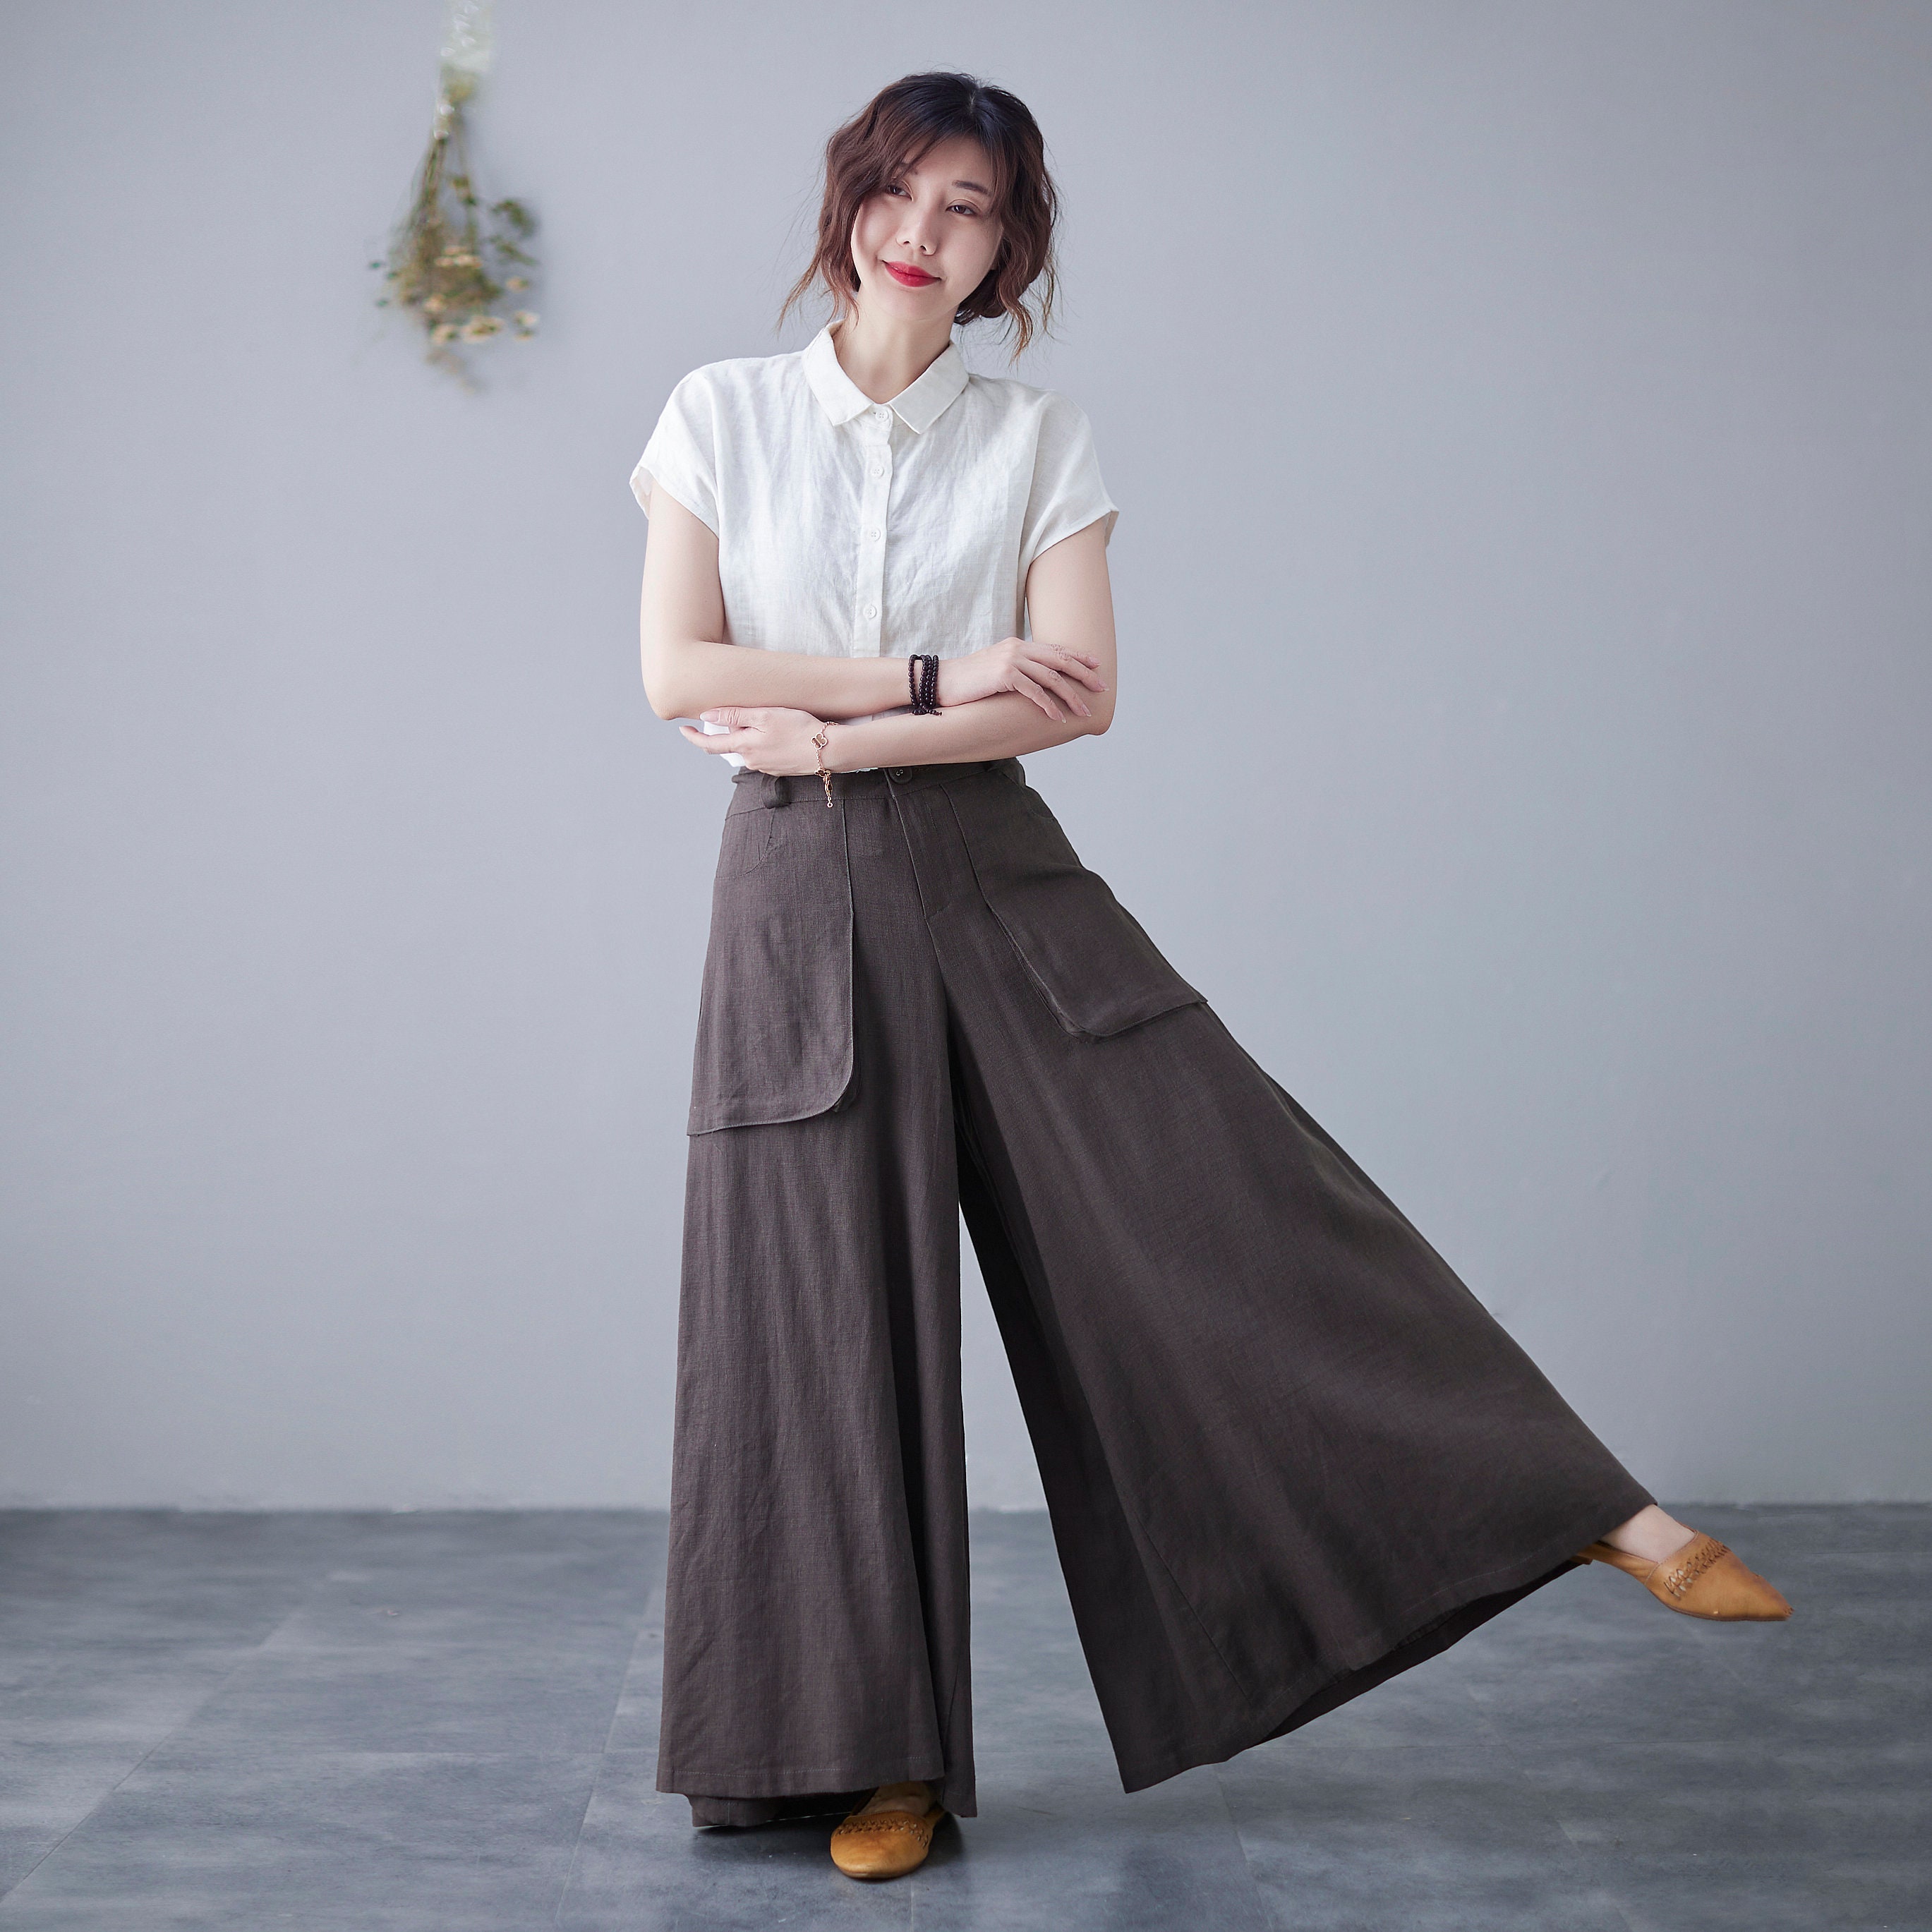 Frankie Natural Grey Trousers Barrel Trousers Linen Trousers Loose Linen  Pants Linen Pants 